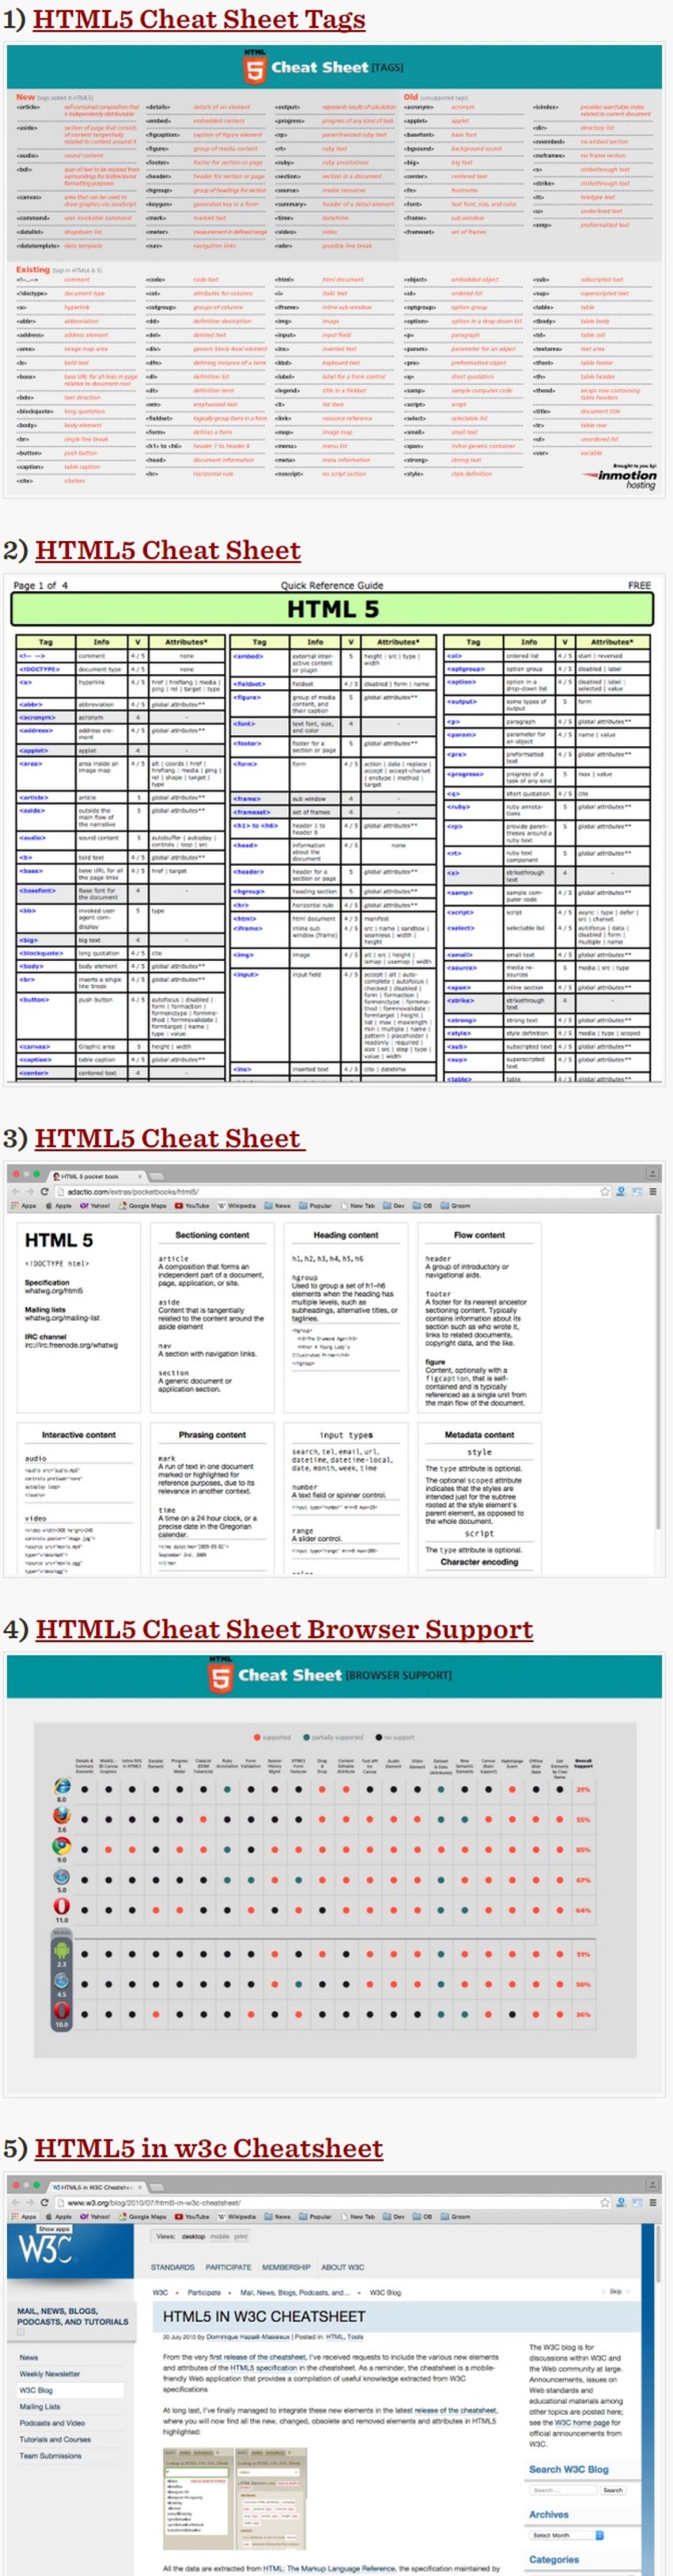 Highly useful HTML5 Cheat sheet for Designers and Developers | Devzum | The MarTech Digest | Scoop.it